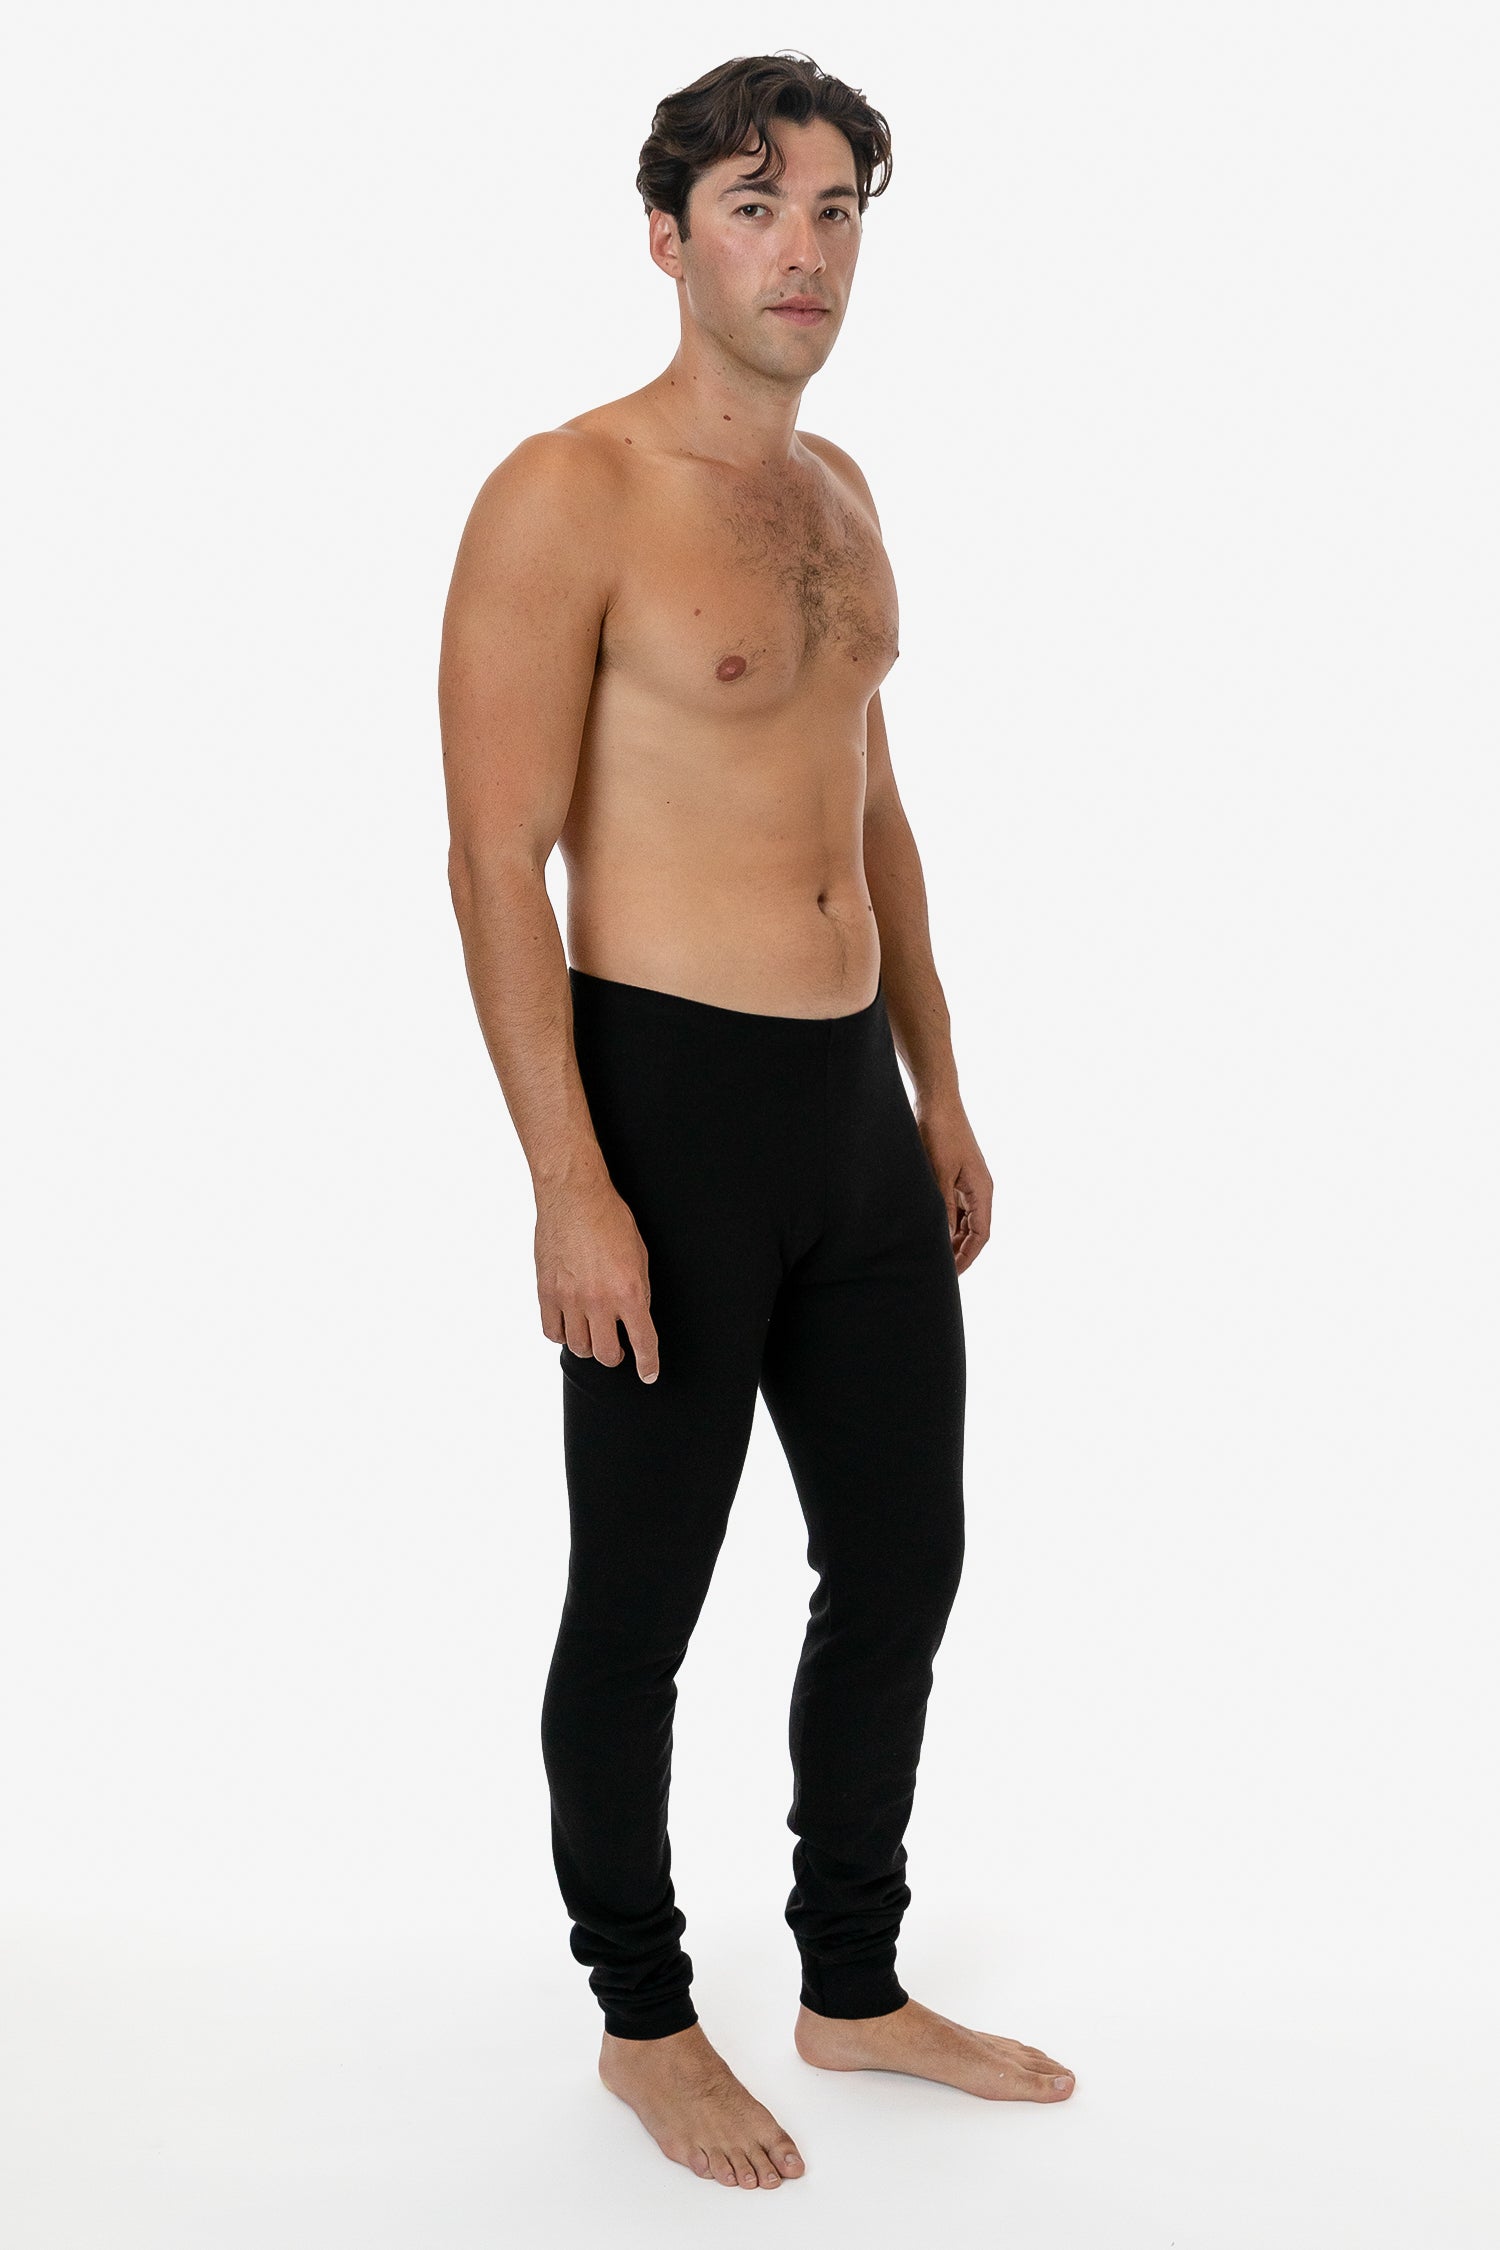 Supply Middle-Aged and Elderly Long Johns Men's Cotton Warm